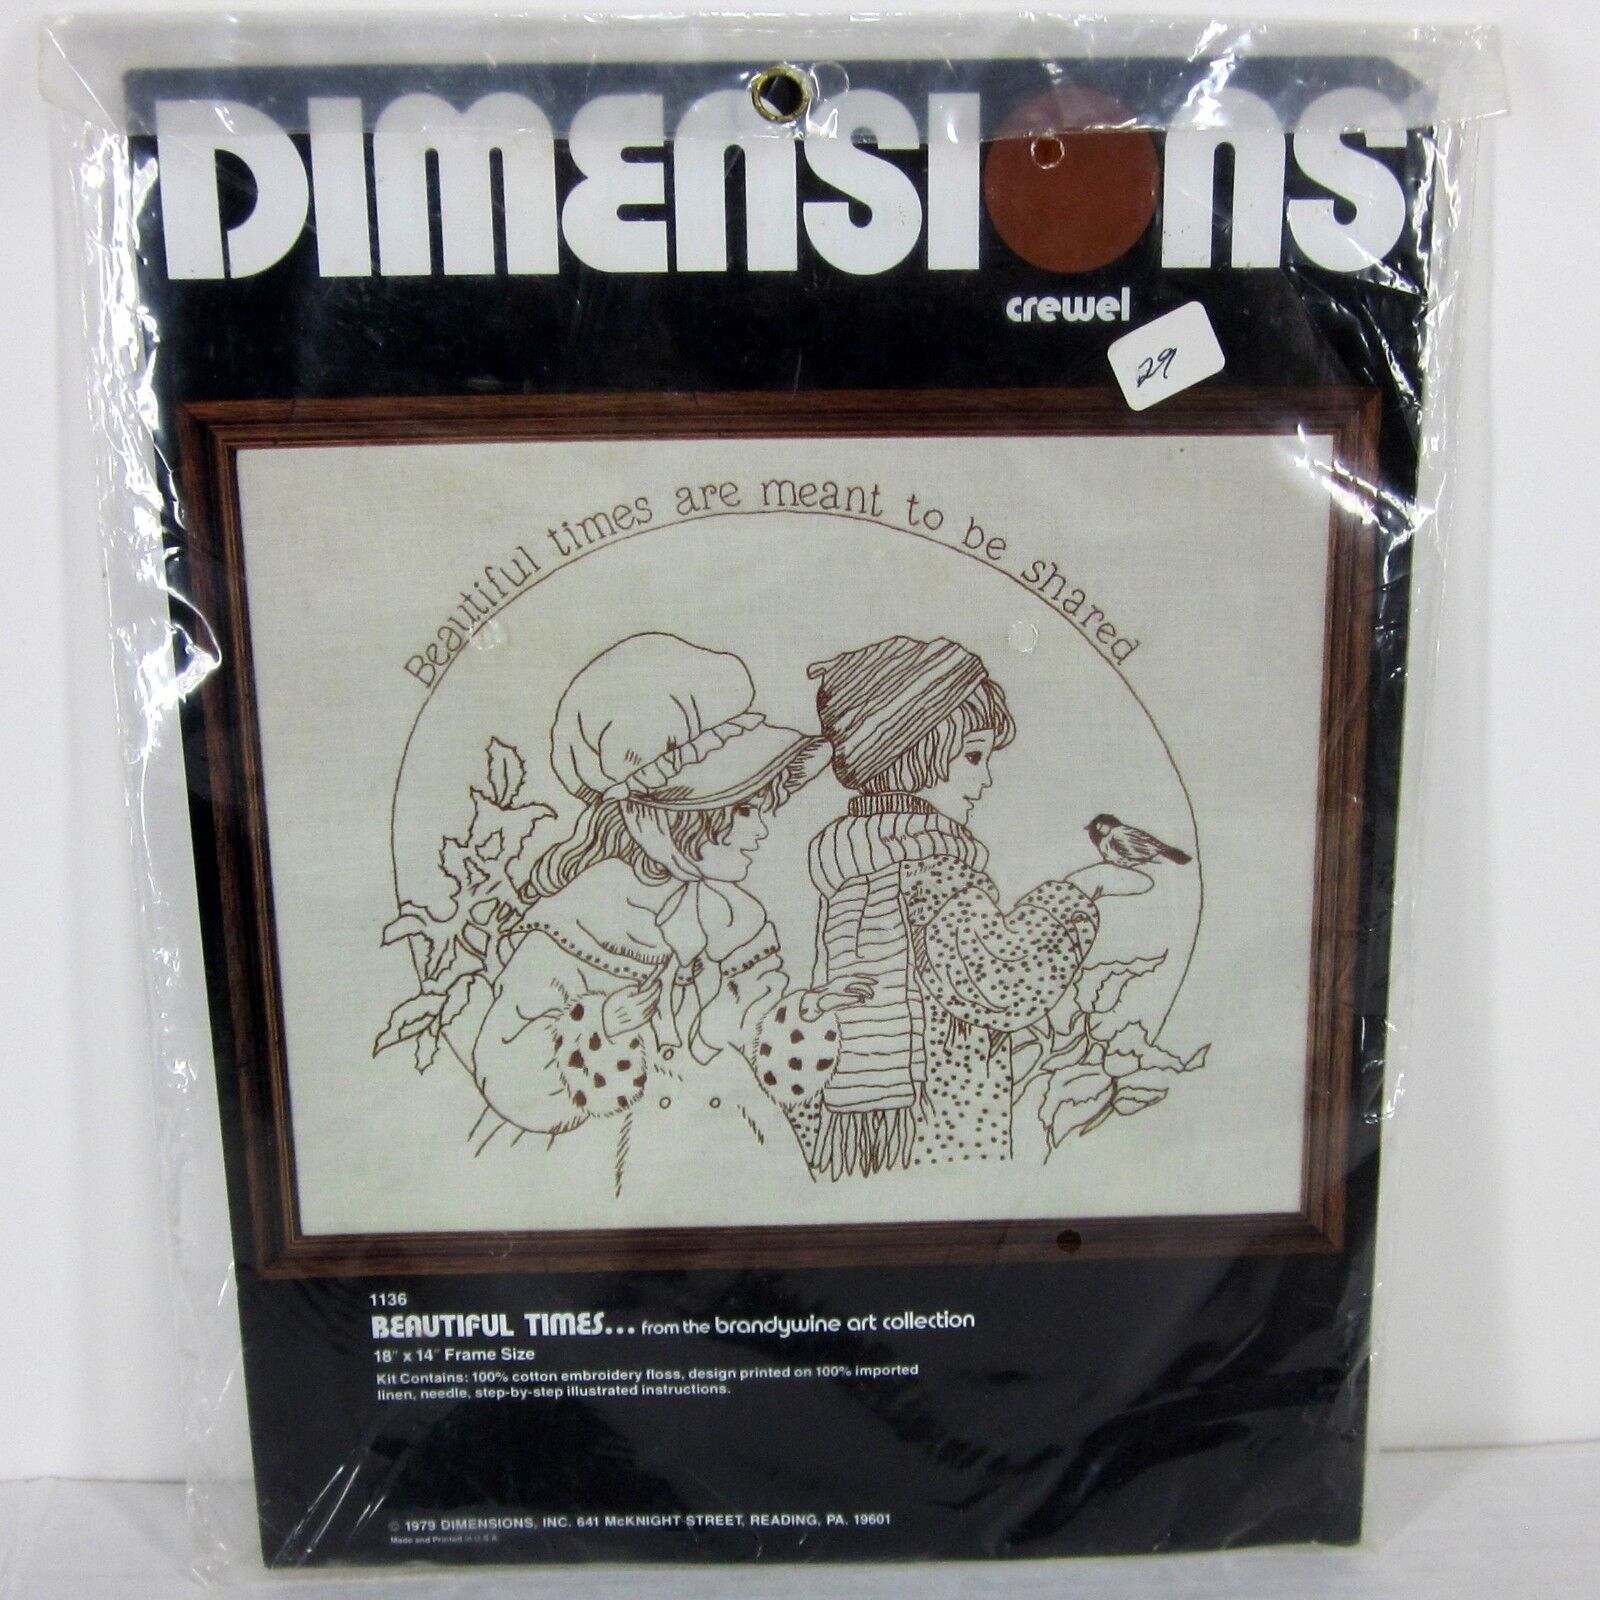 DIMENSIONS 1136 "BEAUTIFUL TIMES" CREWEL EMBROIDERY KIT 1979 USA 18" x 14" BROWN - $29.25